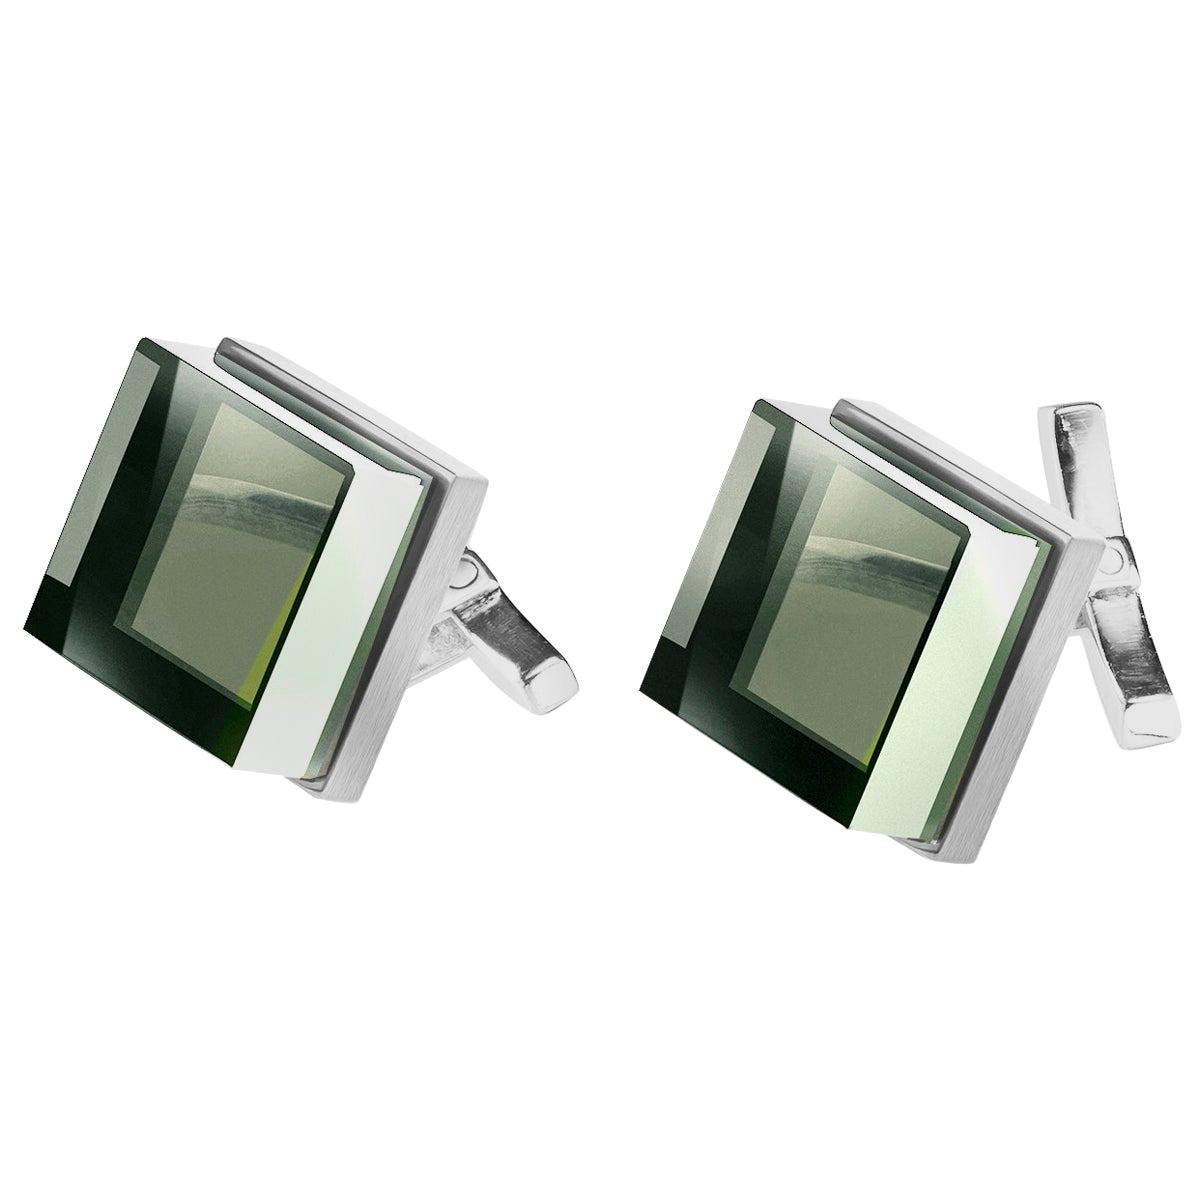 White Gold Men's Art Deco Style Cufflinks by the Artist with Green Quartz